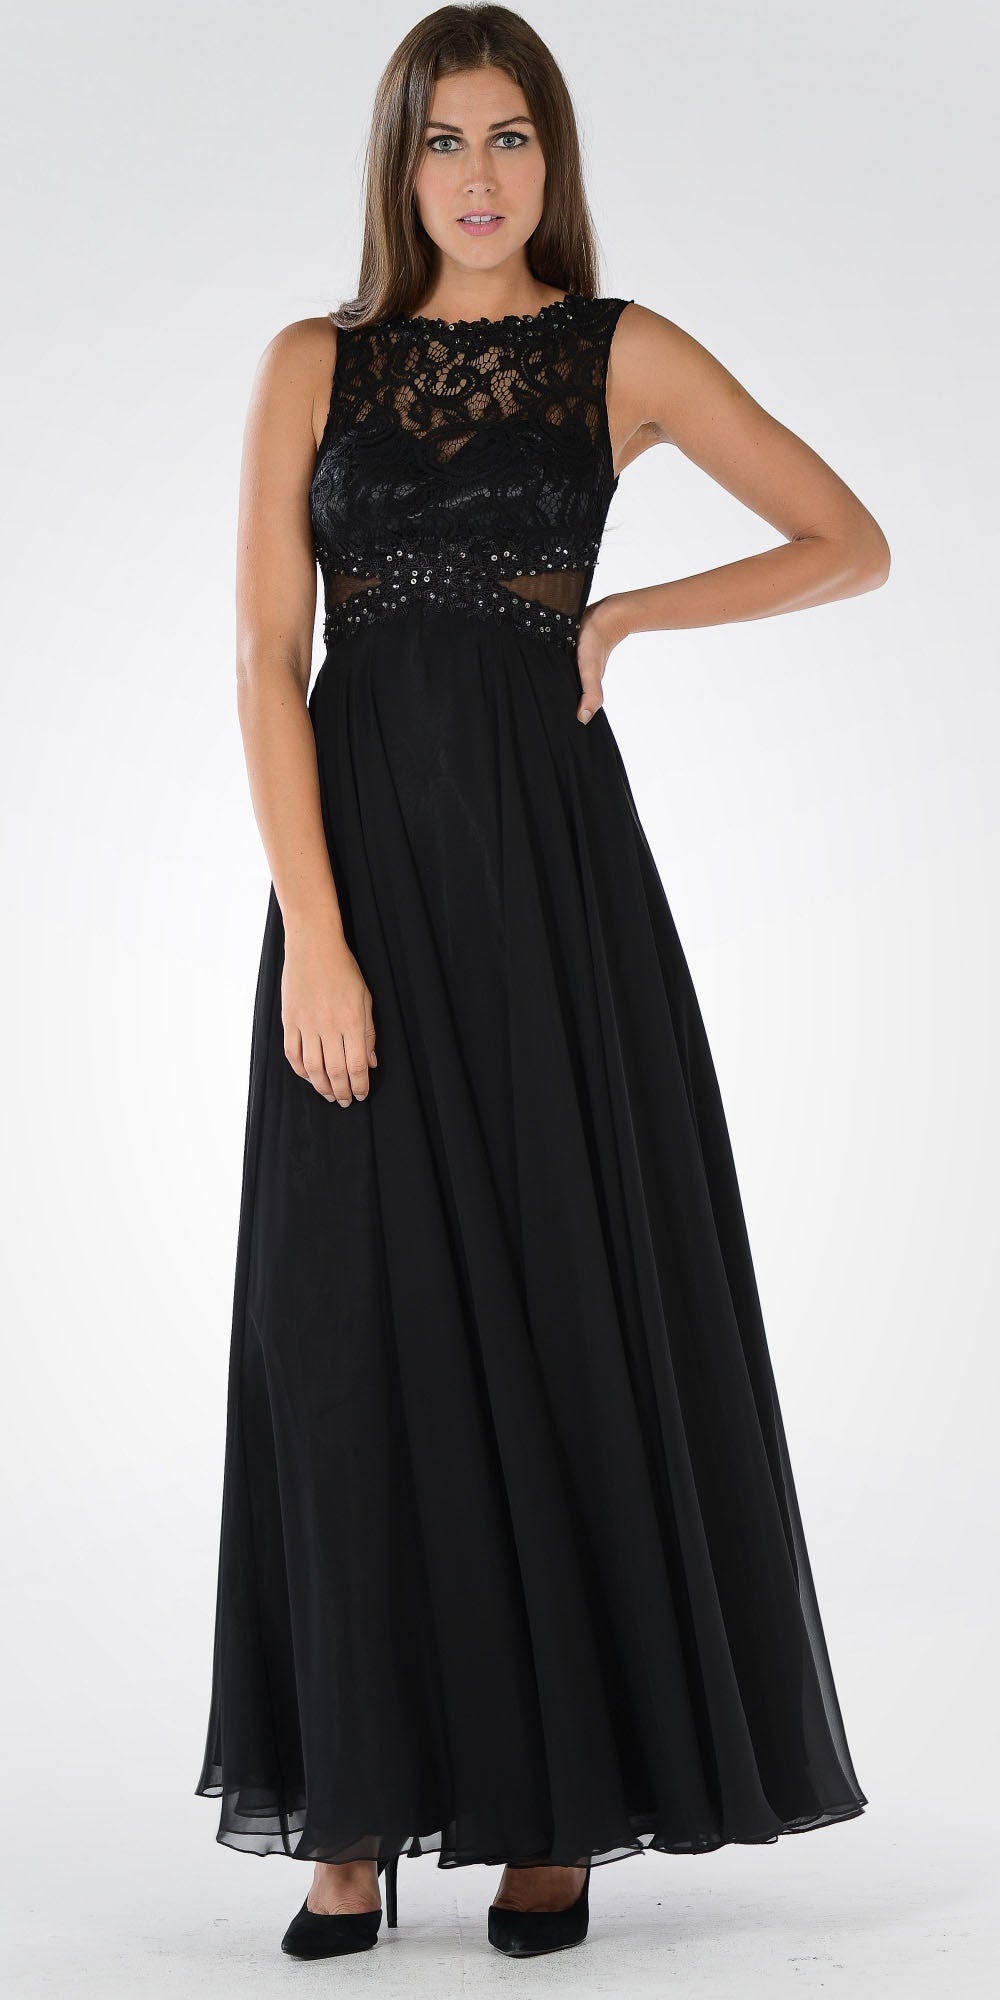 Lace Bodice Sleeveless A-Line Formal Dress Black Long Mesh Side Cut Outs